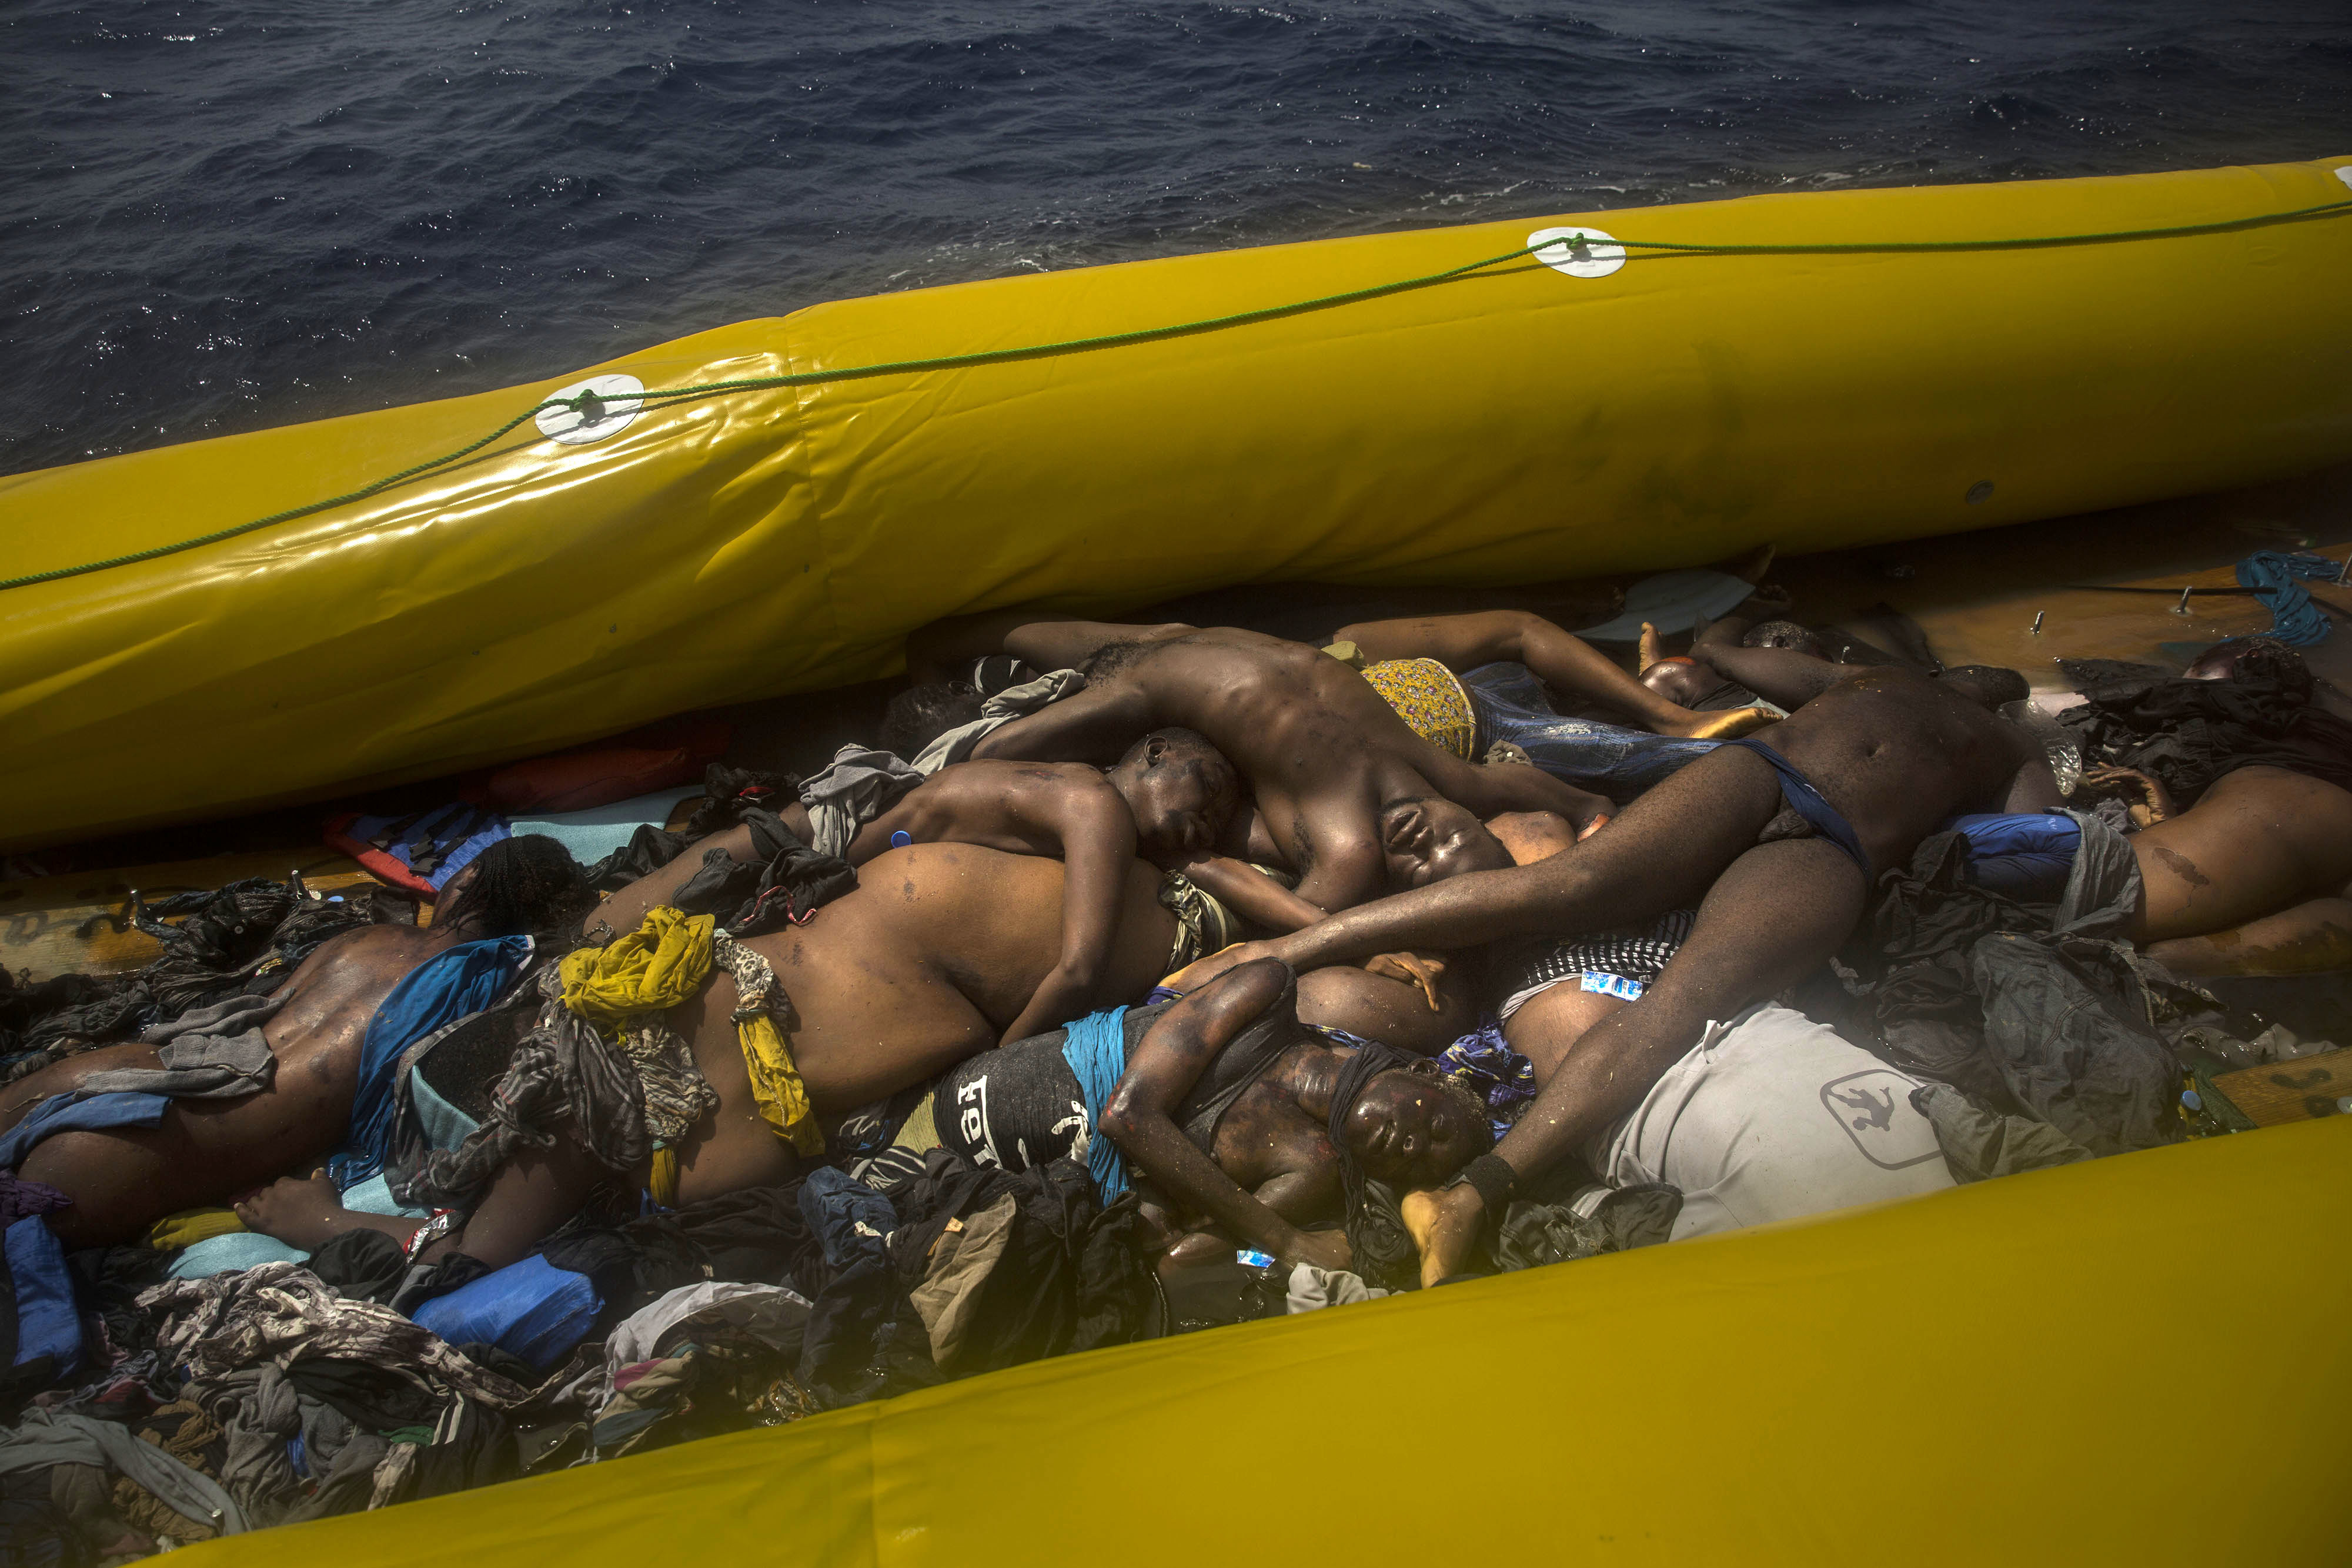 EDS NOTE: GRAPHIC CONTENT - Dead bodies of migrants are seen inside a rubber boat in the Mediterranean Sea, about 15 miles north of Sabratha, Libya on Tuesday, July 25, 2017. (AP Photo/Santi Palacios)